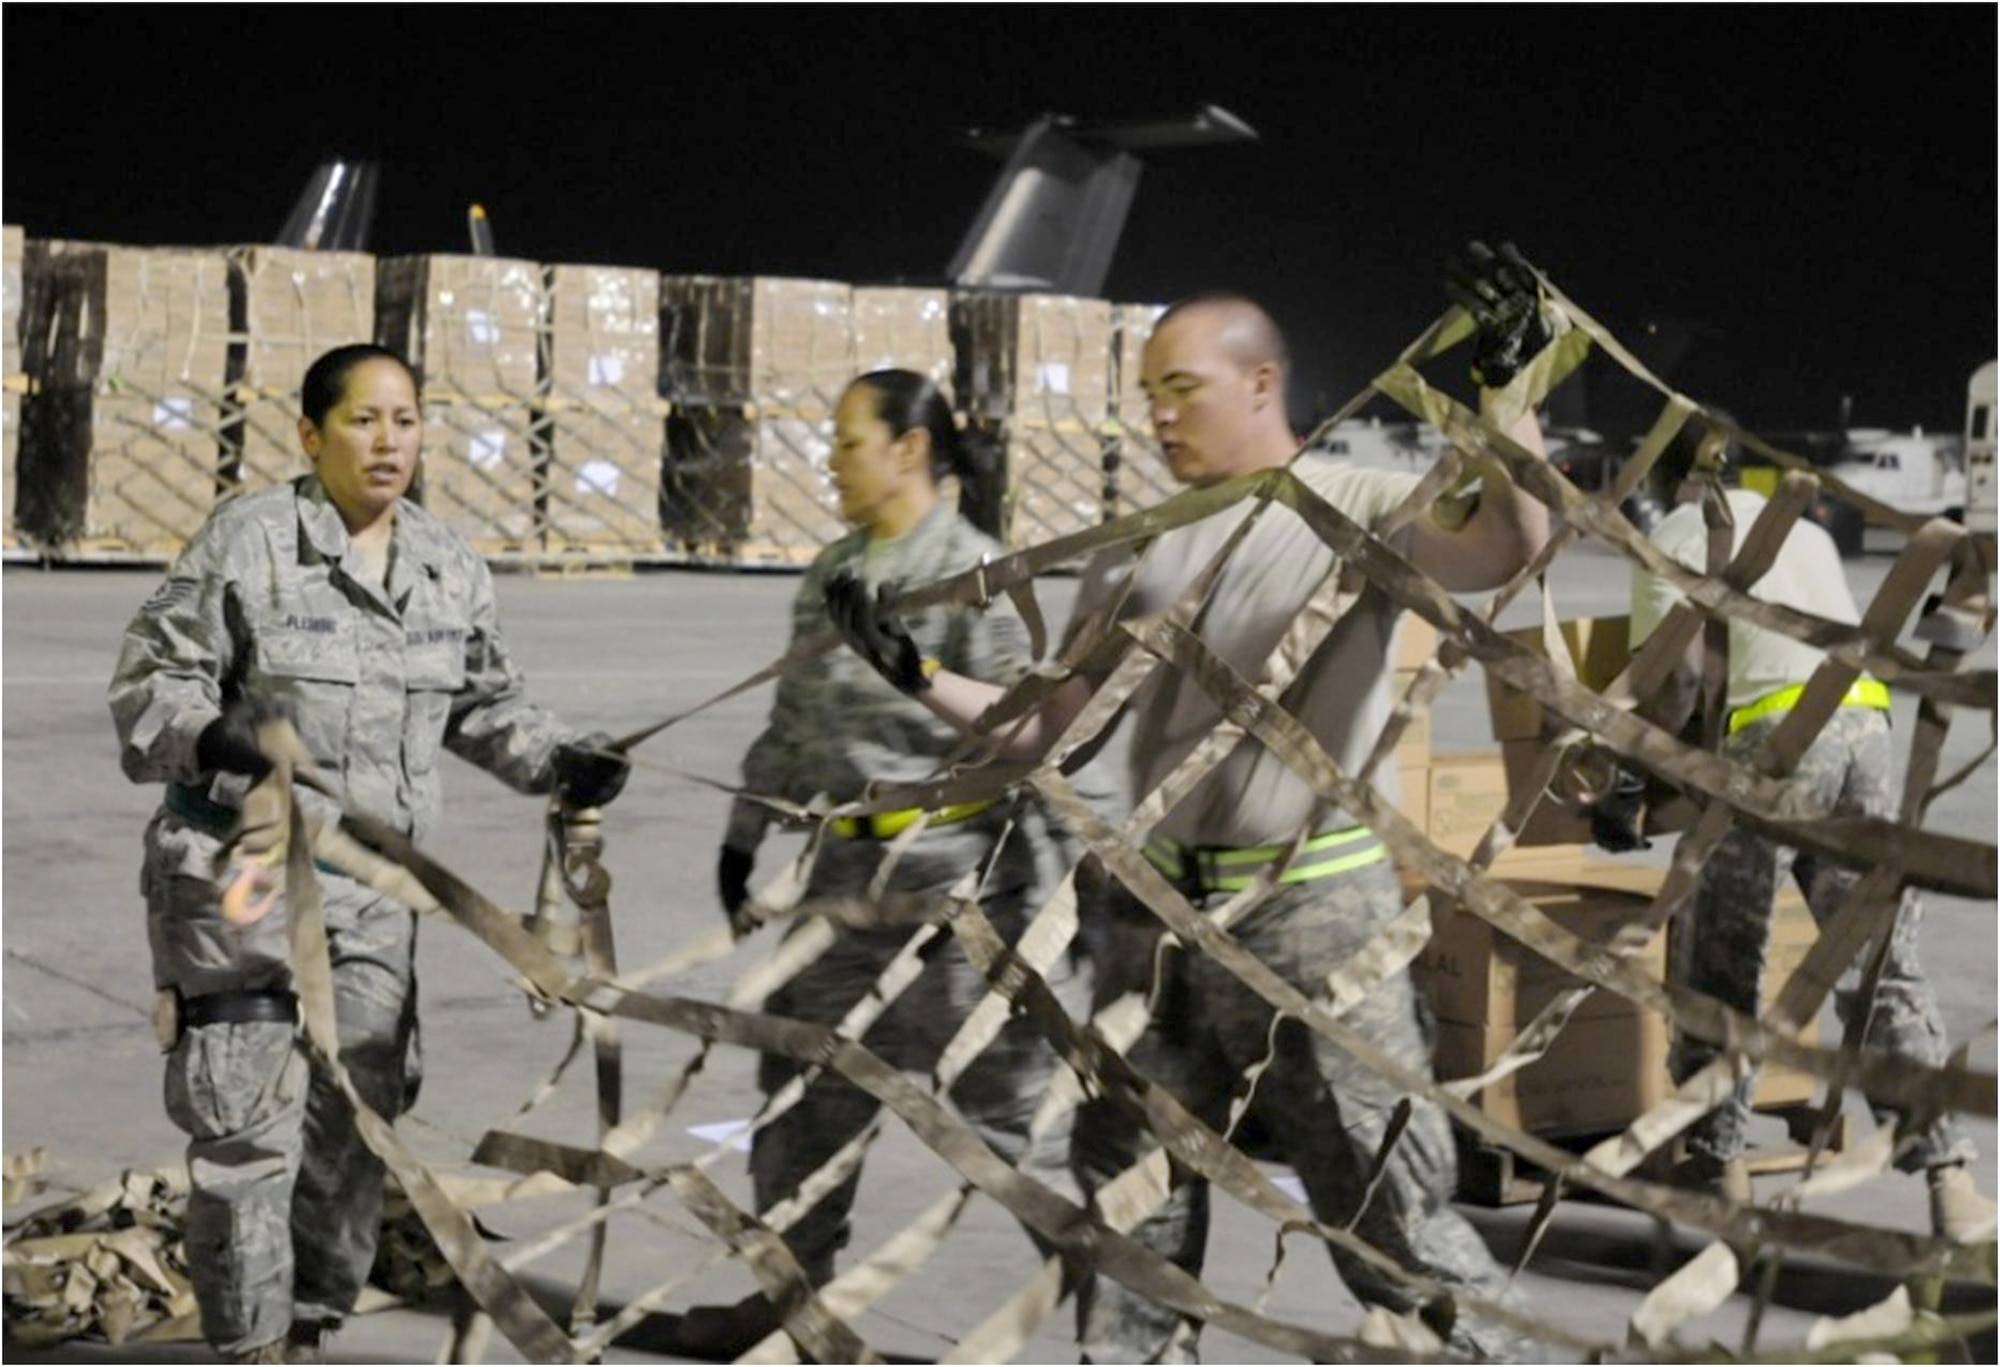 Tech. Sgt. Cheryl Flemming instructs a pallet-building team on how to prepare a cargo net for placement over a completed pallet Aug. 2, 2010, at Bagram Airfield, Afghanistan, to ensure its contents don't shift during flight. The pallet contains some of the 345 thousand halal meals that have been delivered to northwest Pakistan since July 31, 2010, as part of the humanitarian flood relief assistance provided to the area that's been hit by monsoon rains in recent days. Sergeant Flemming is the 455th Aerial Port Squadron Air Terminal Operations Center quality and control NCO in charge. (U.S. Air Force photo/Capt. Chris Sukach)